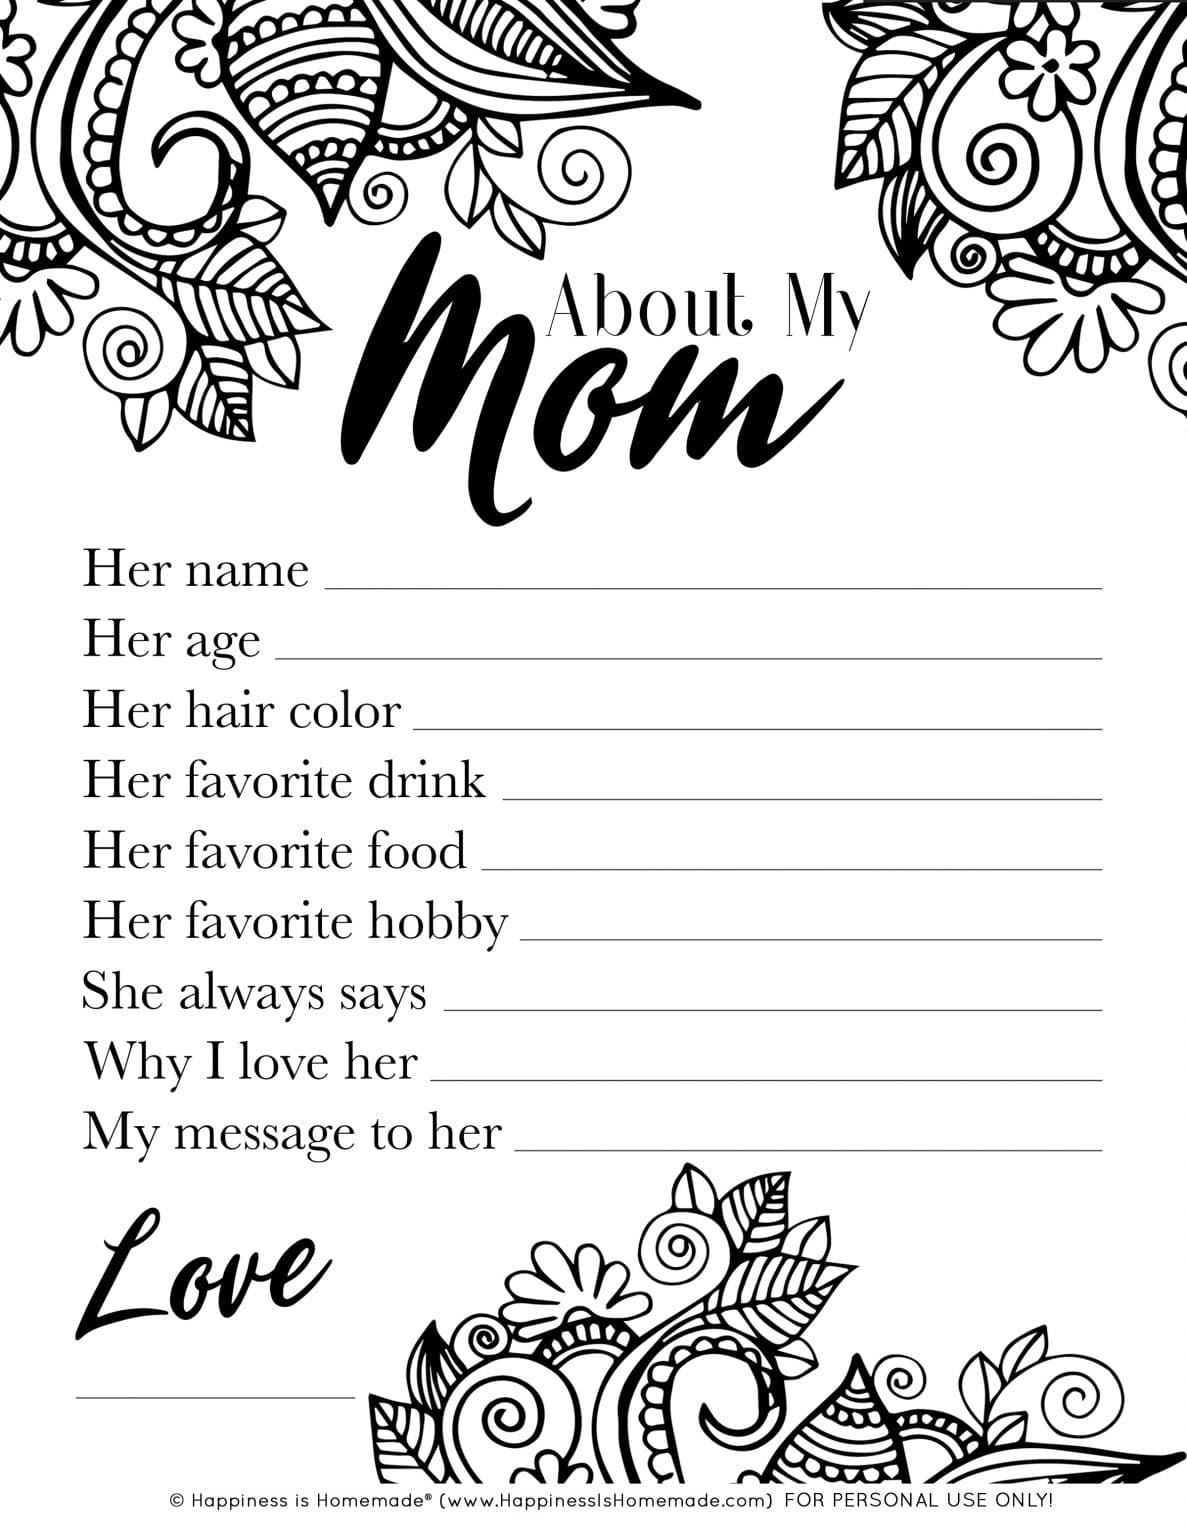 about-my-mom-mother-s-day-printable-happiness-is-homemade